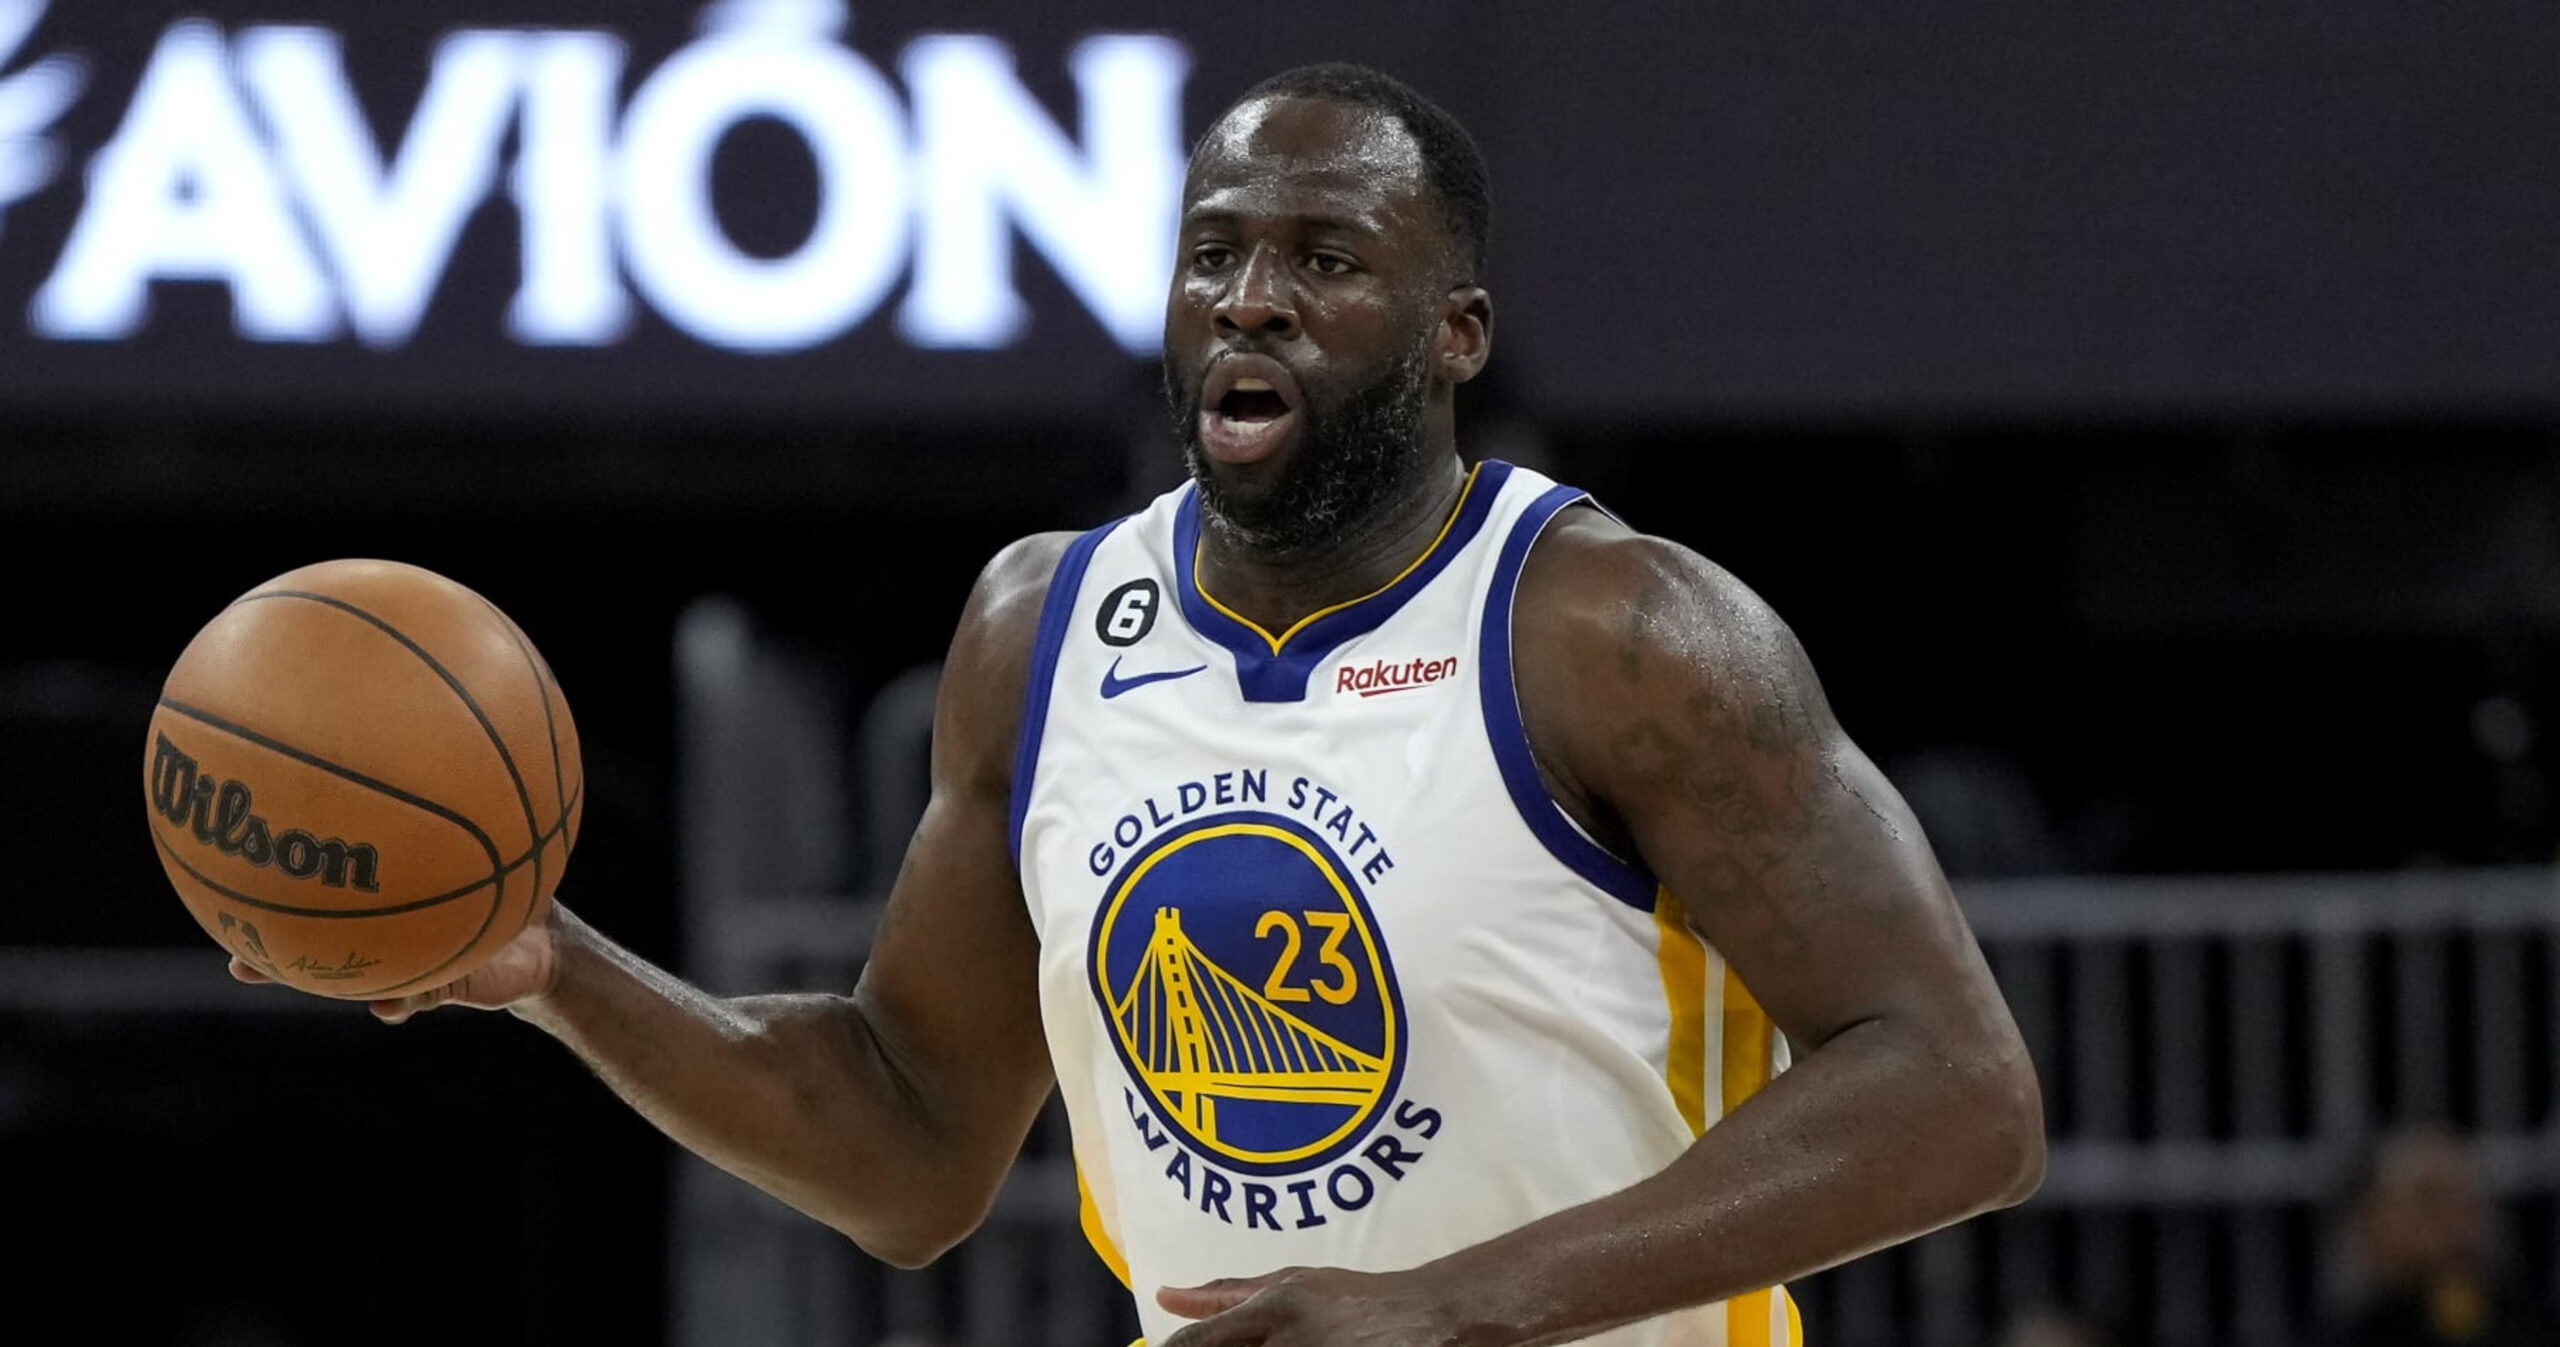 Draymond Green, Golden State Warriors Rumors: Draymond Green Expected to Join the Los Angeles Clippers